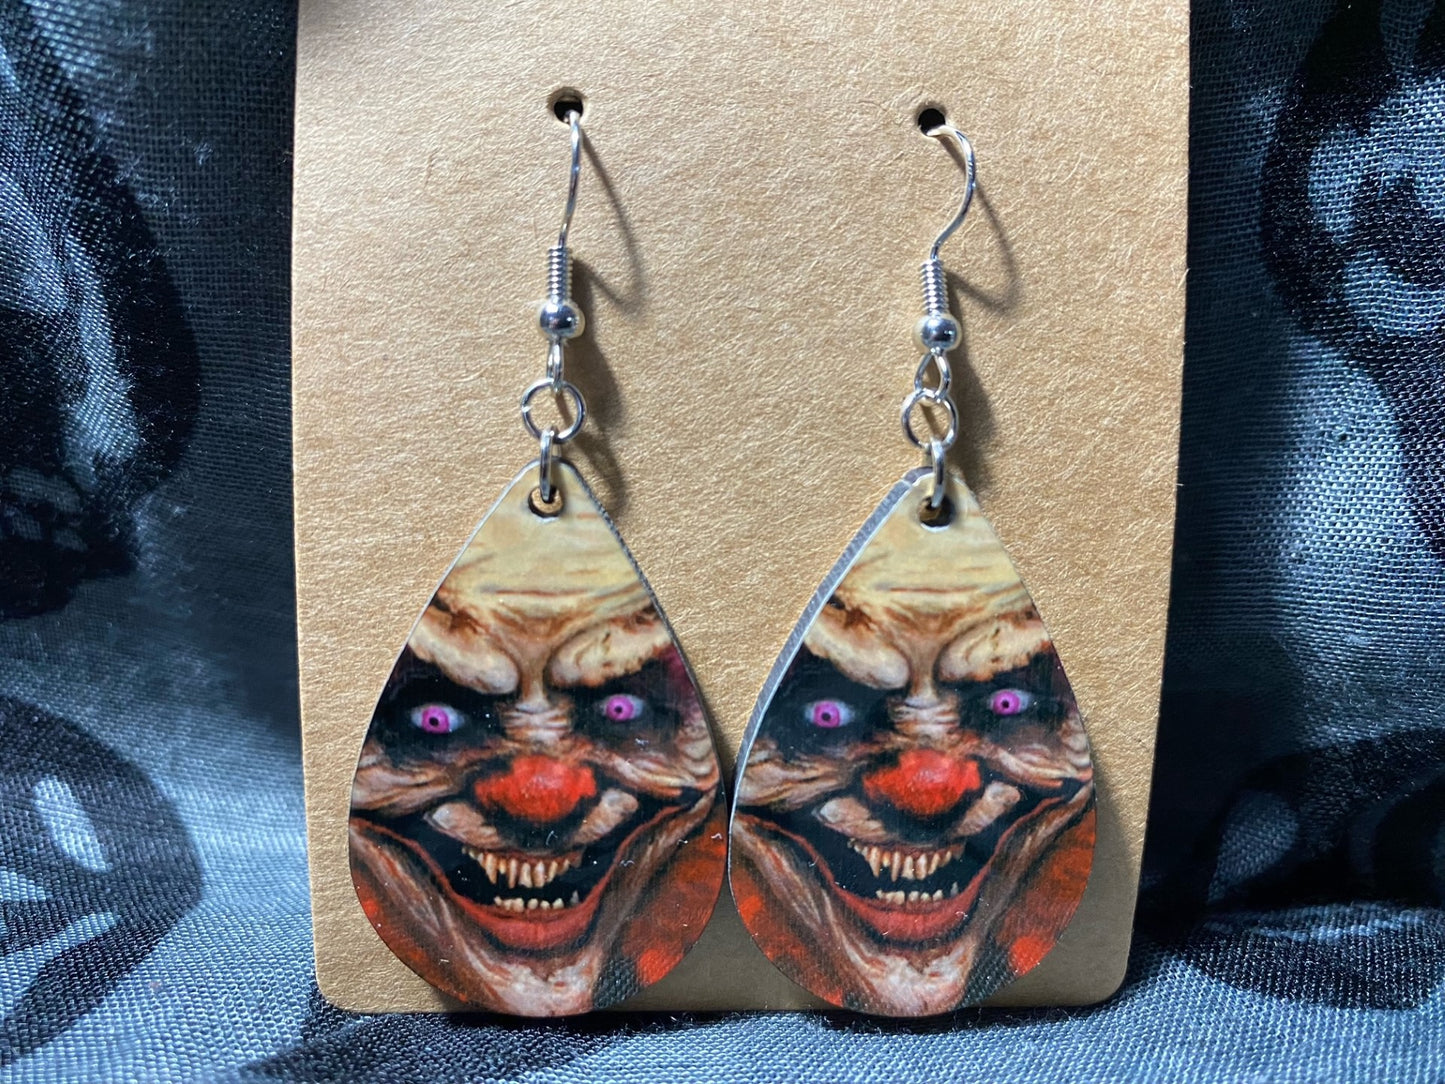 Chester the Clown Drop Earrings